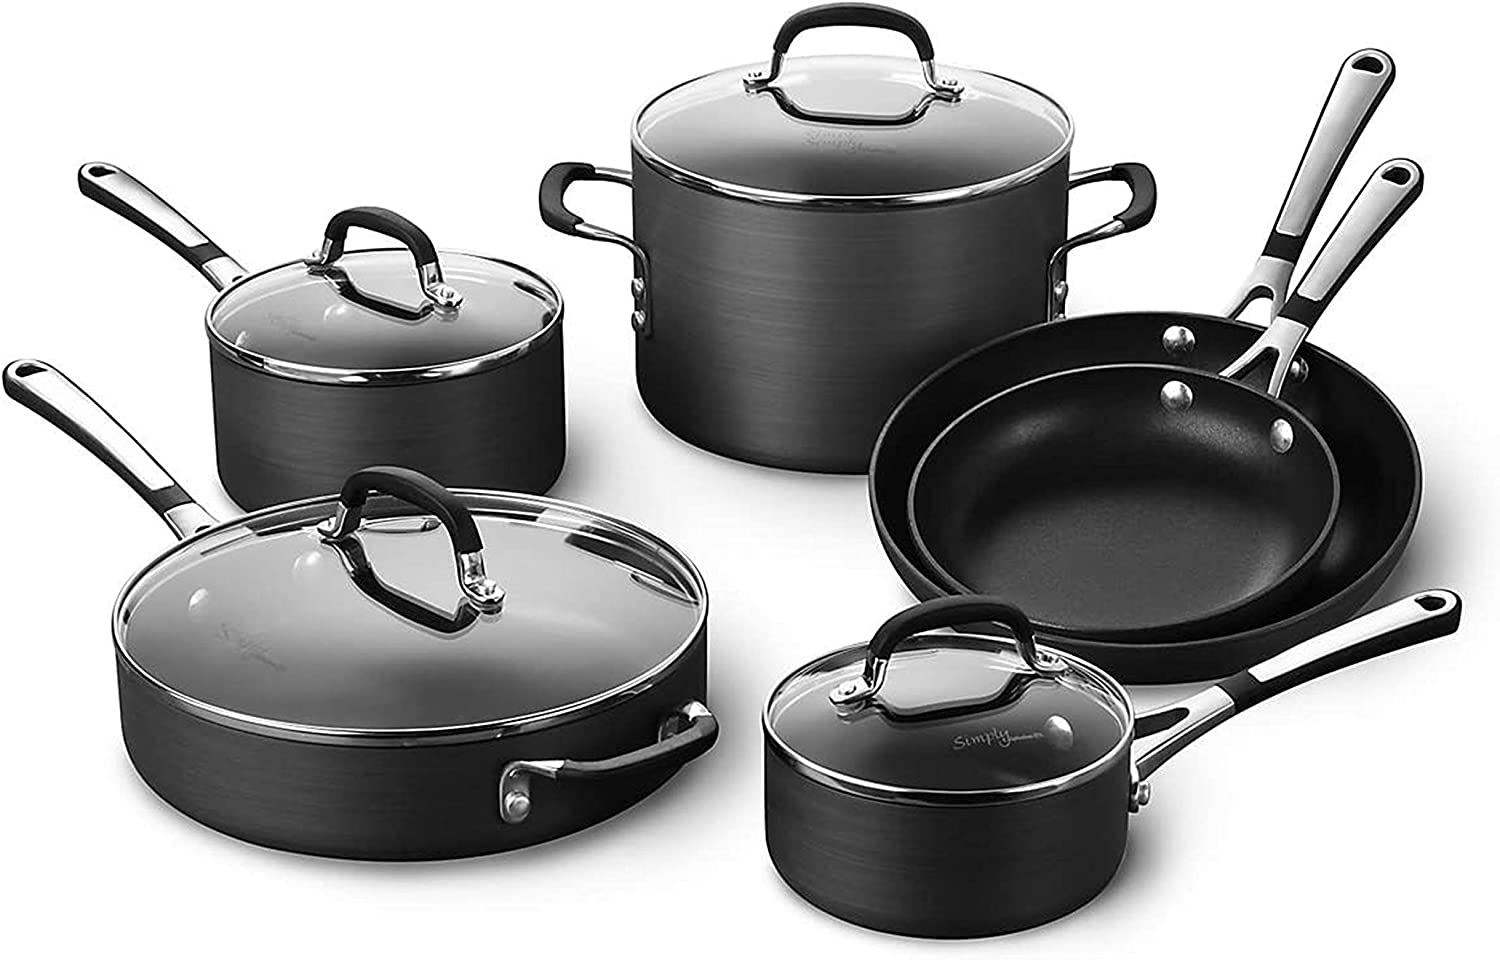 https://bigbigmart.com/wp-content/uploads/2023/06/Calphalon-10-Piece-Pots-and-Pans-Set-Nonstick-Kitchen-Cookware-with-Stay-Cool-Stainless-Steel-Handles-Black.jpg